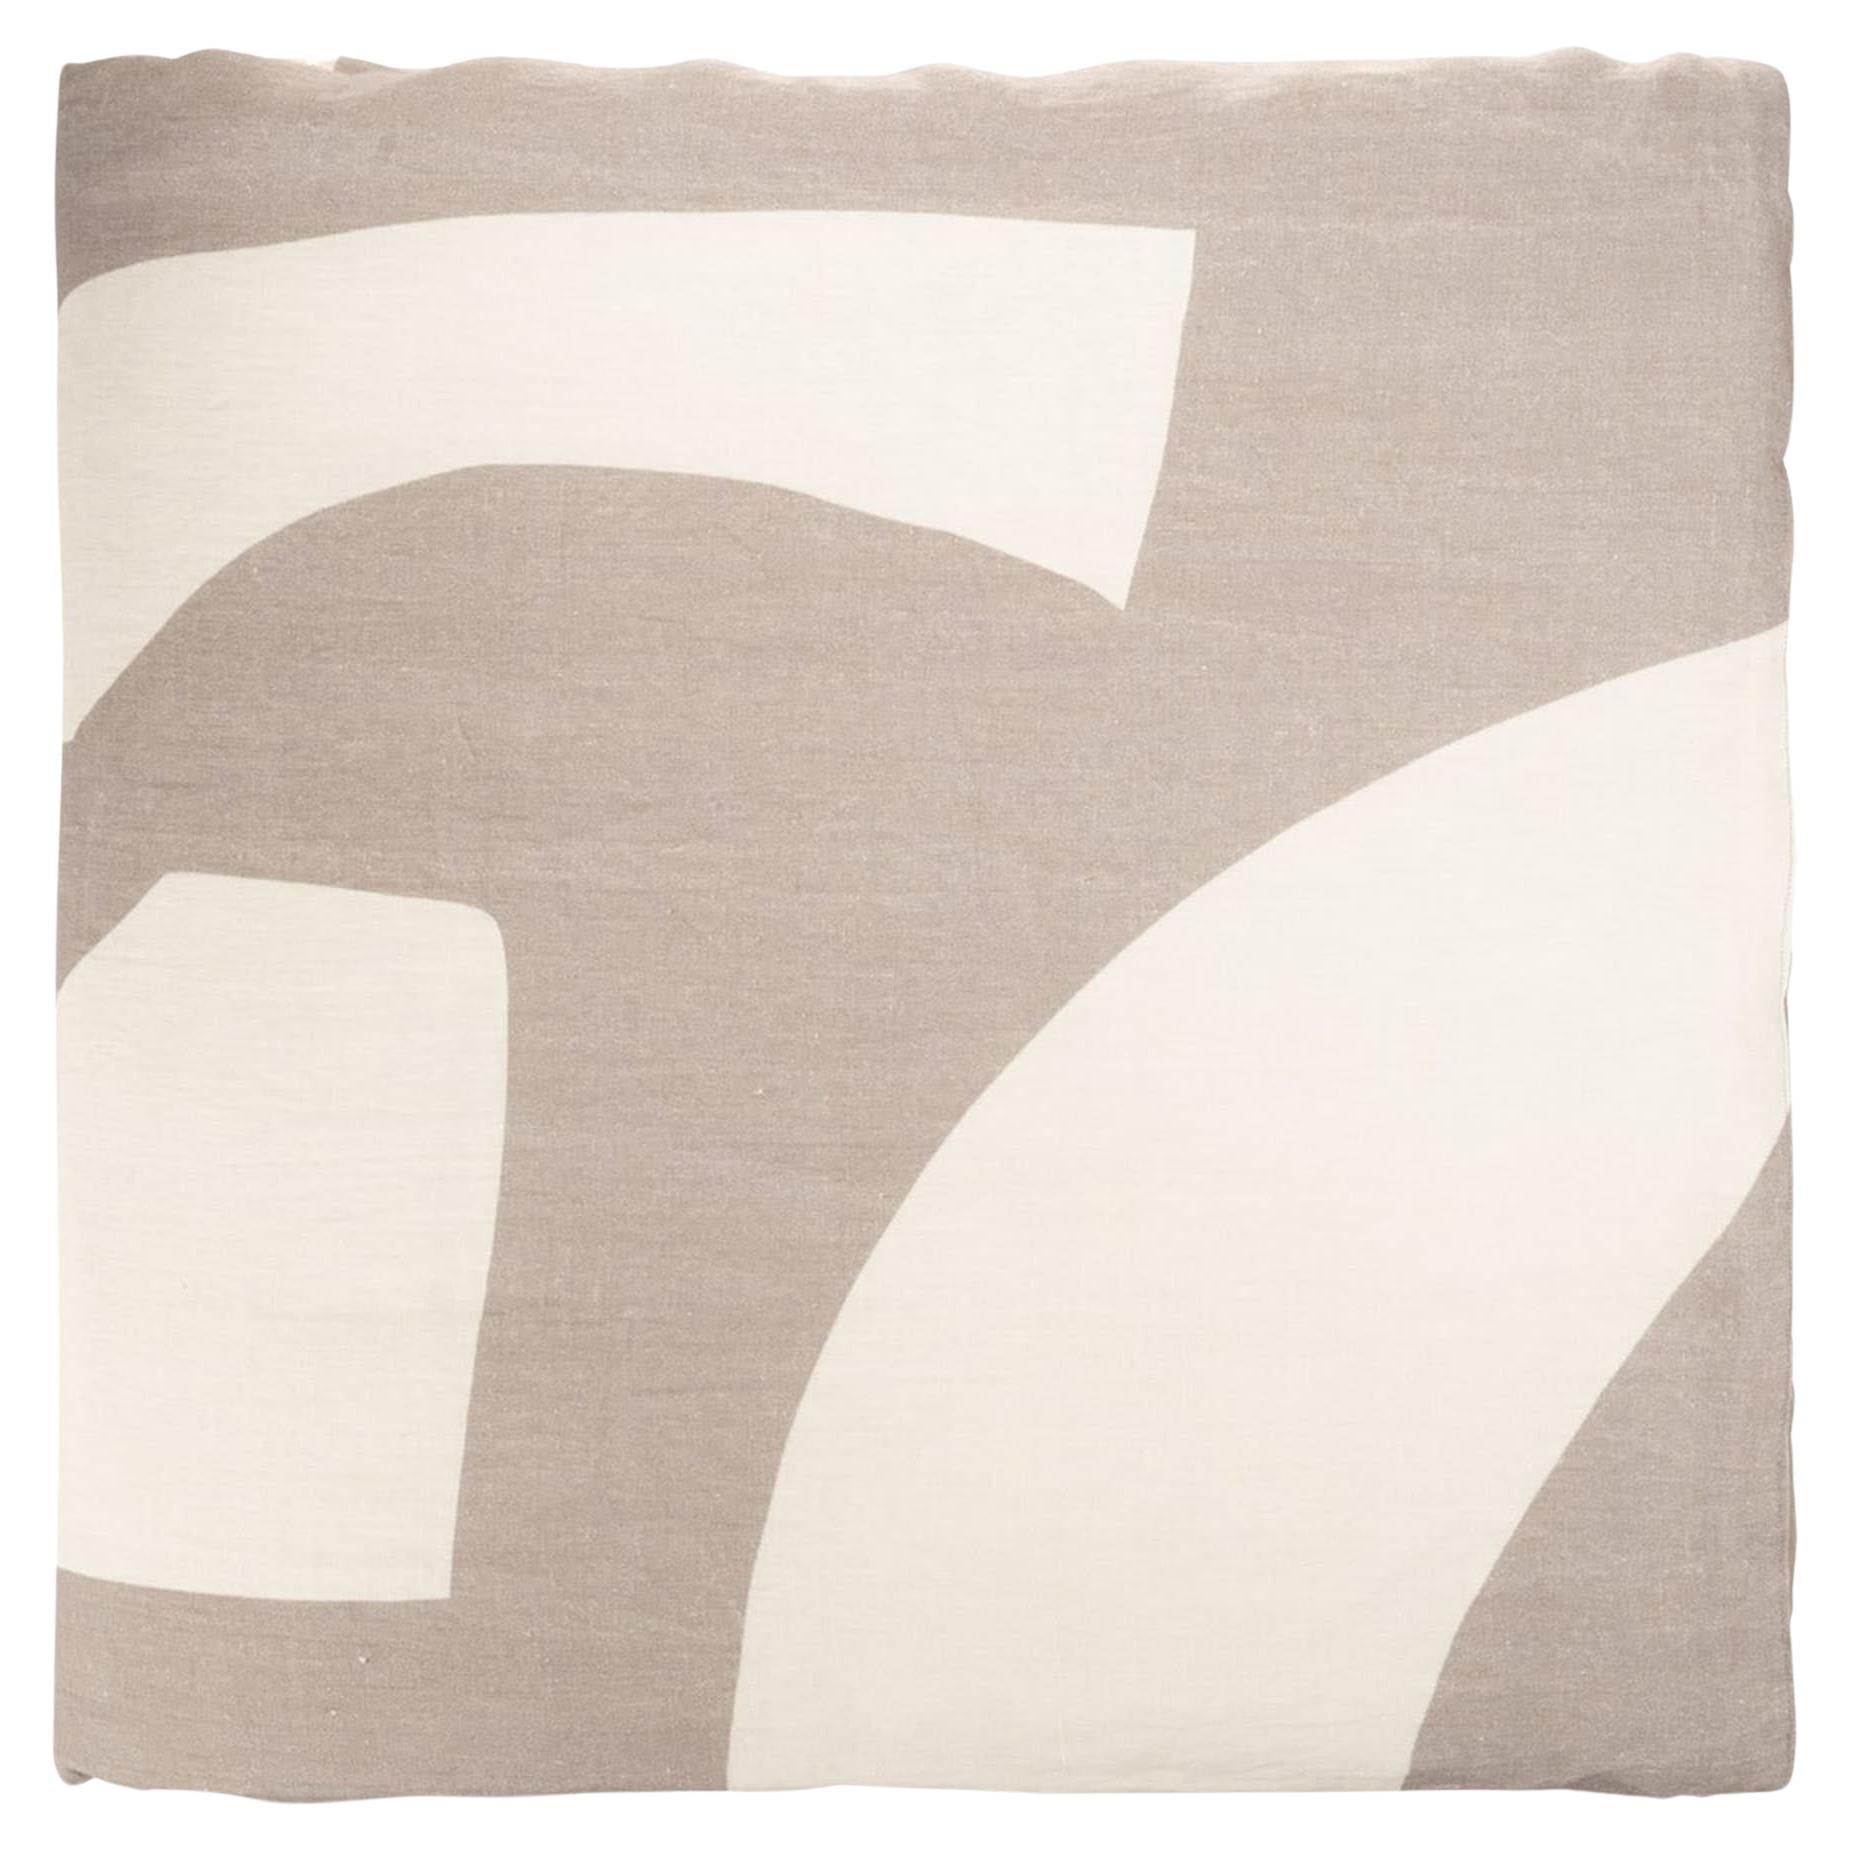 Sibylle#4 Beige/Cream Printed Throw by Studiopepe